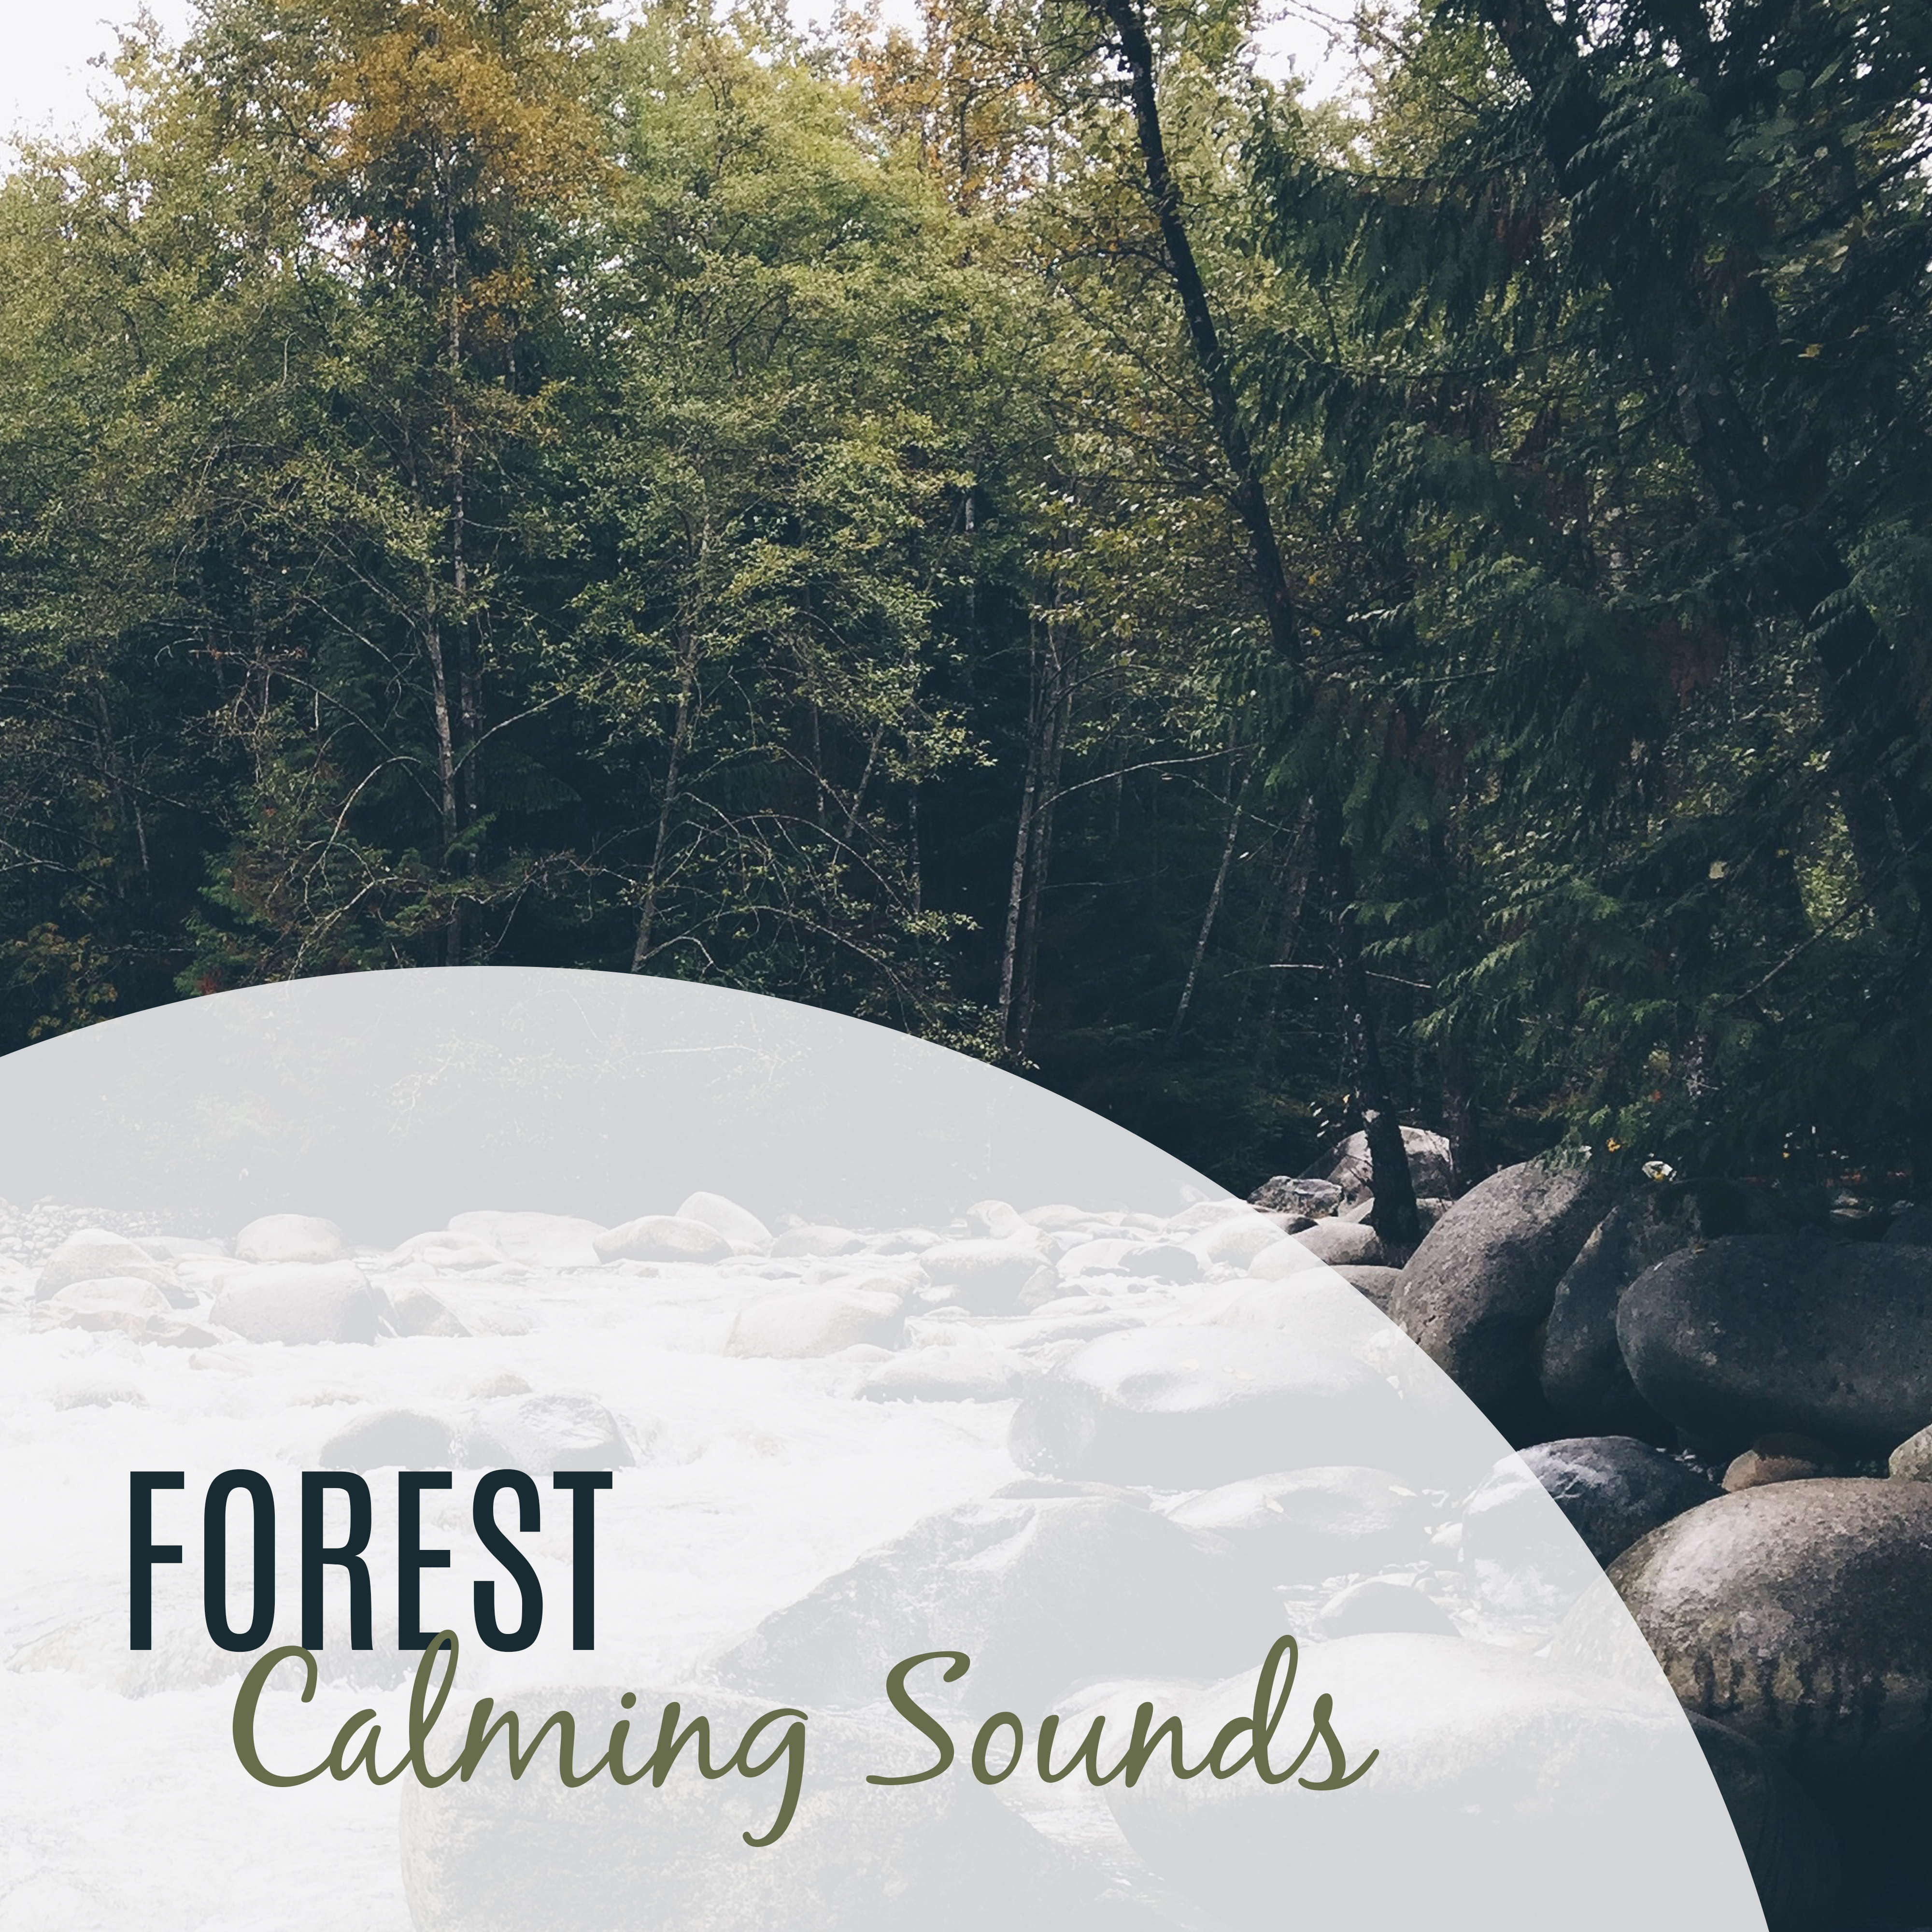 Forest Calming Sounds – Nature Sounds, Music to Rest, Music for a Walk, Chill Yourself